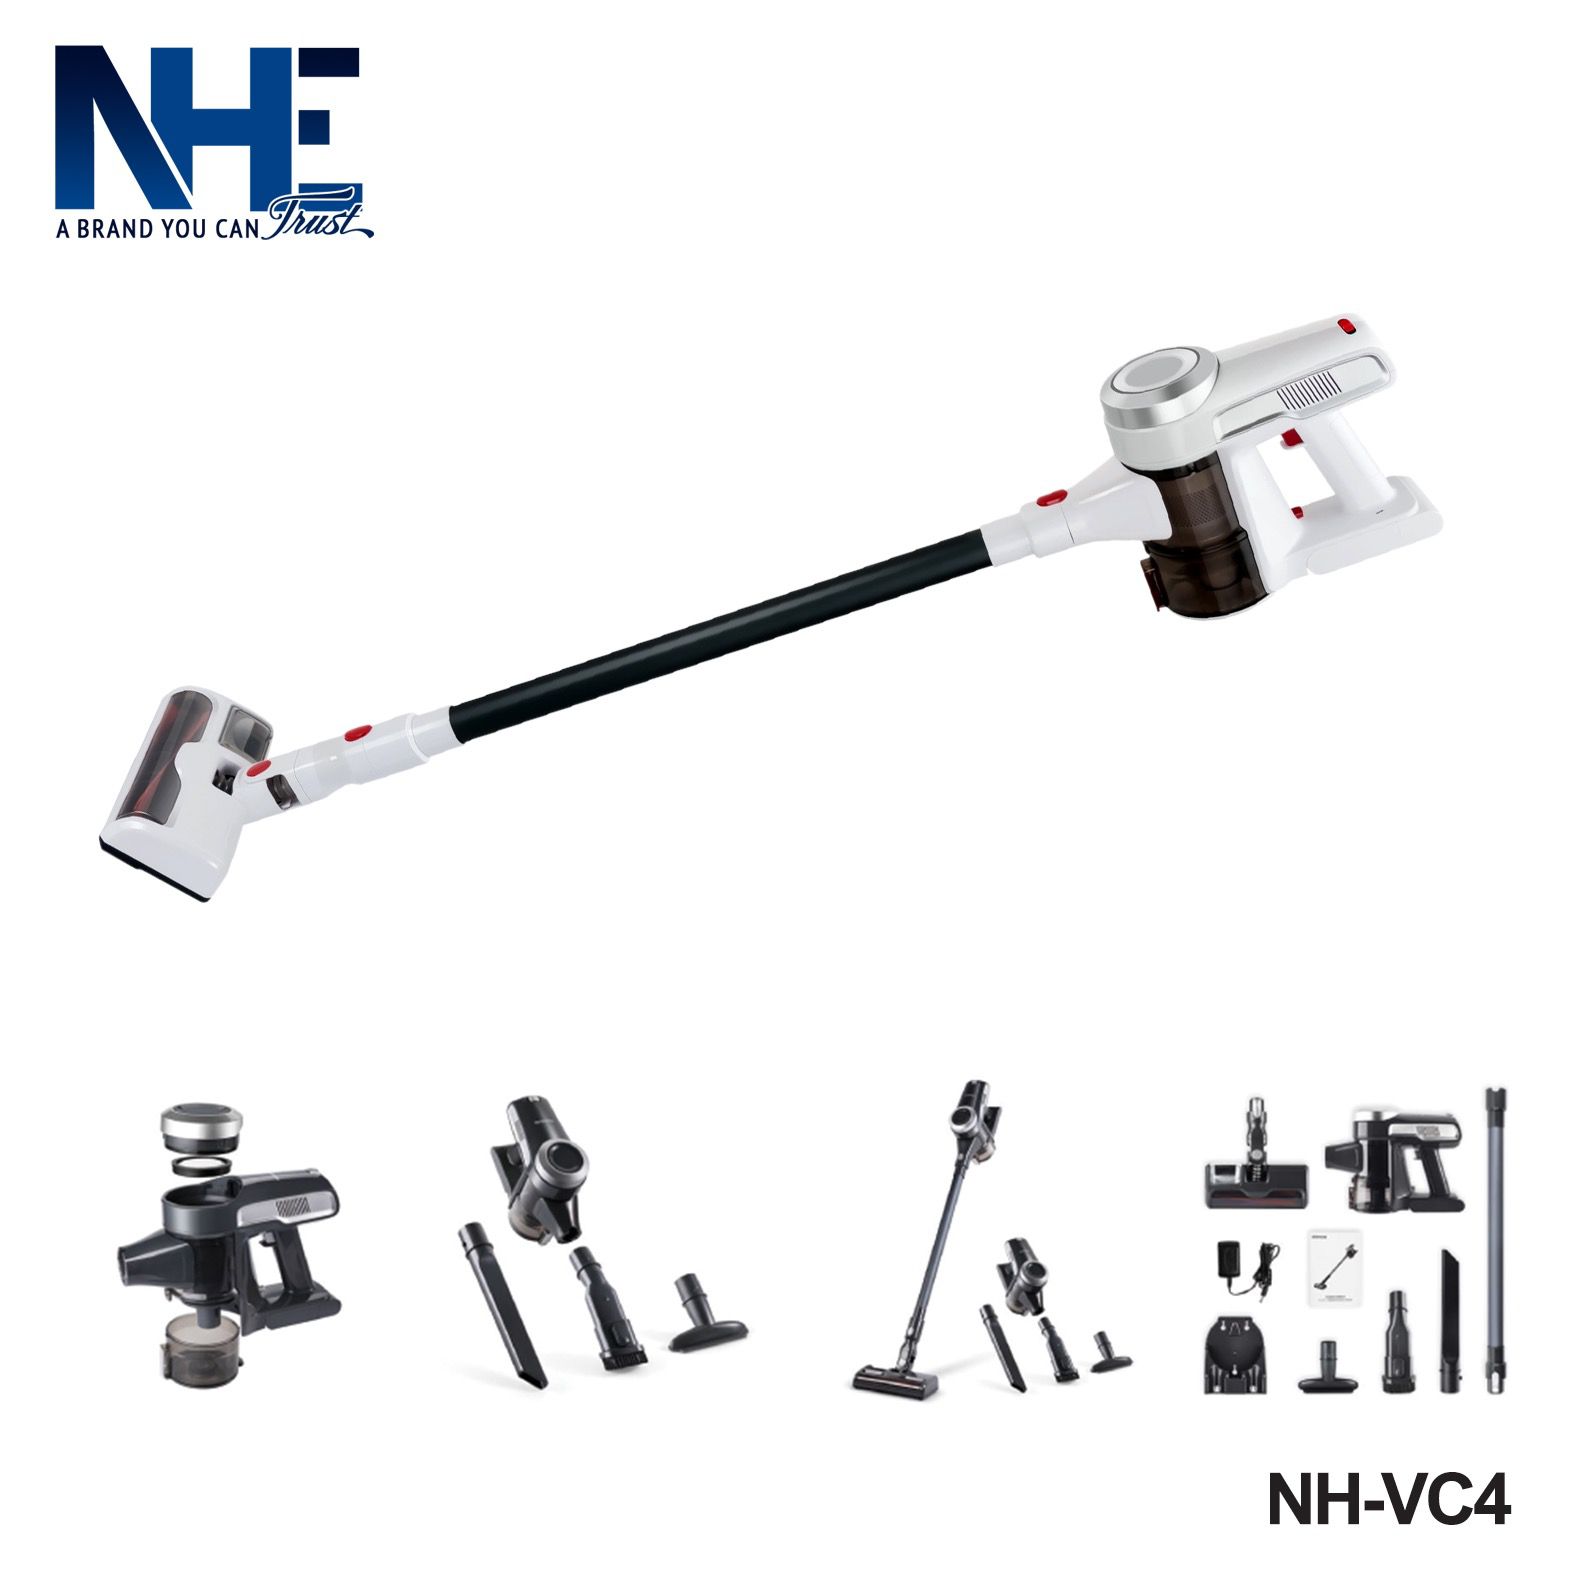 NHE Cordless Vacuum Cleaner NH-VC4